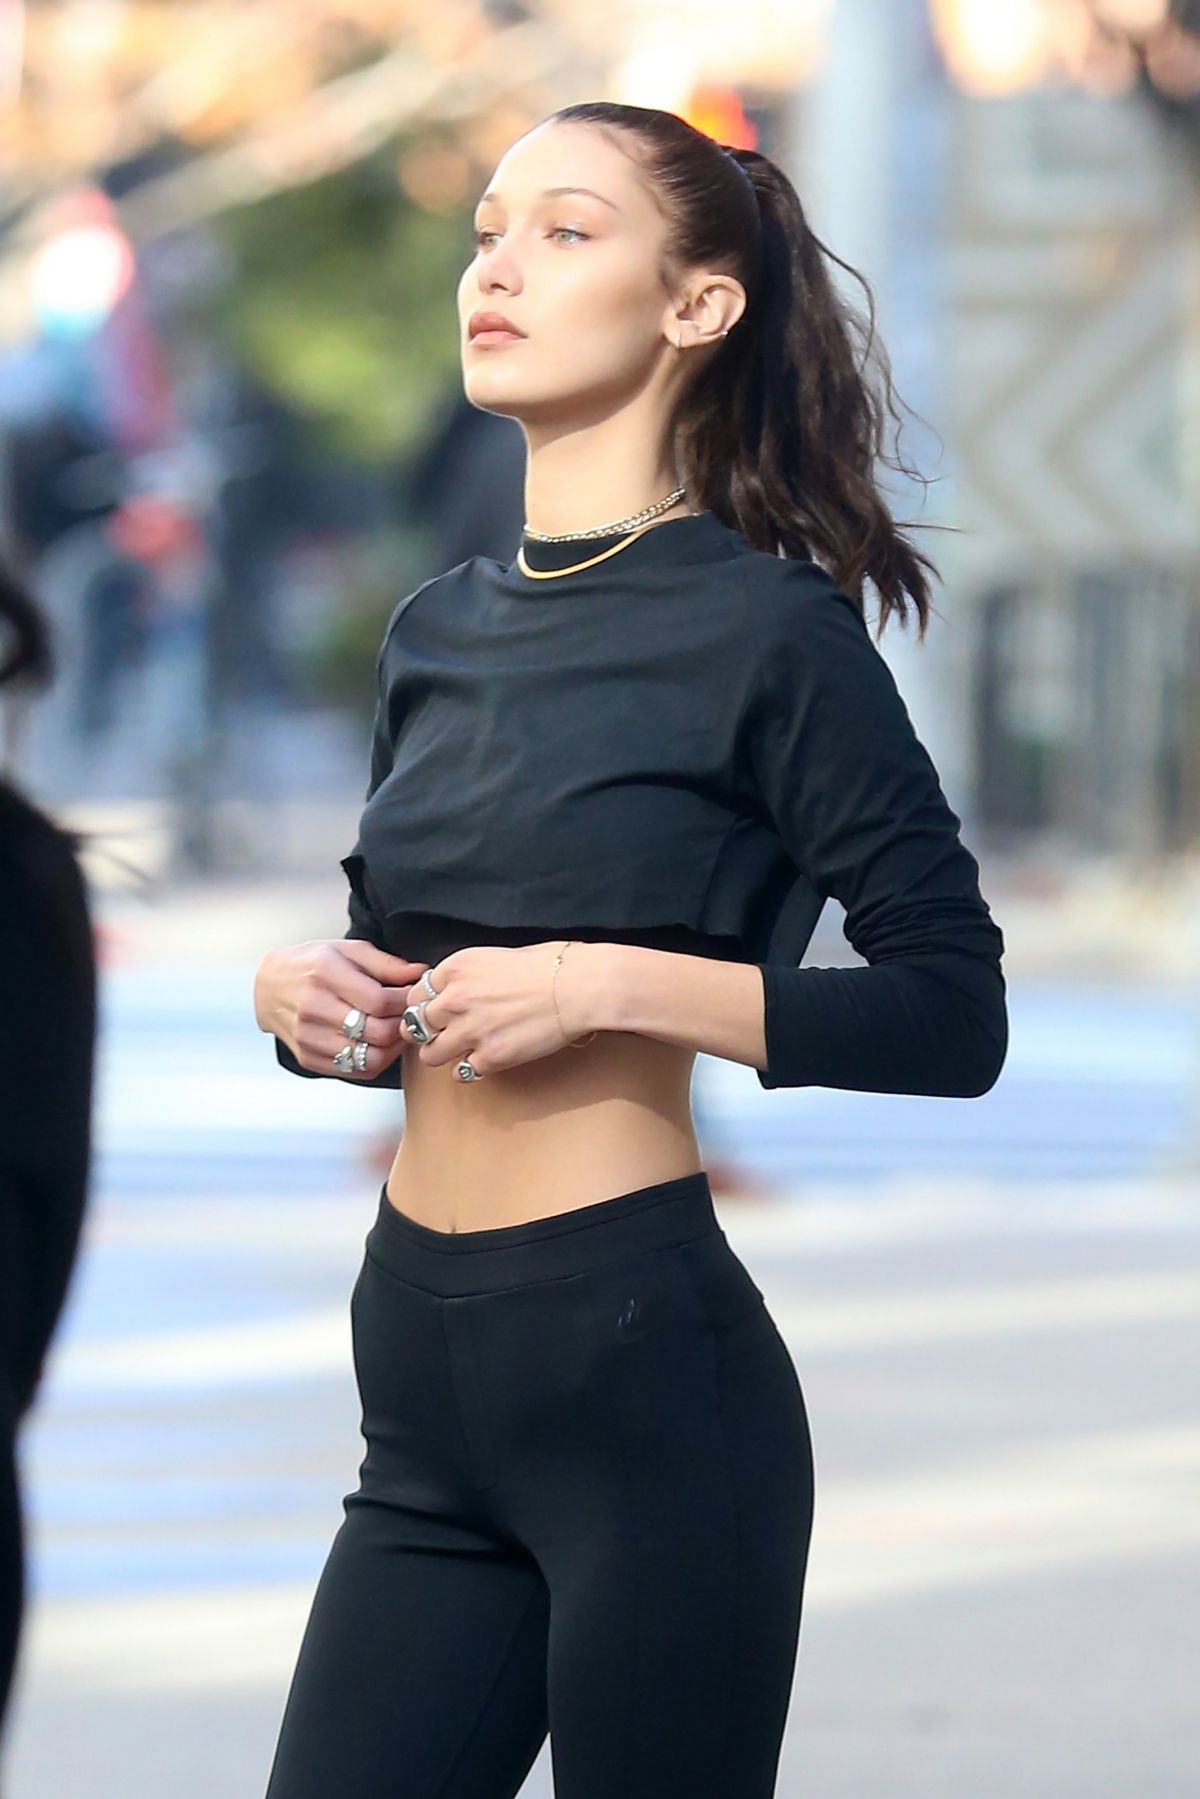 bella-hadid-in-tights-out-in-new-york-11-14-2016_2.jpg